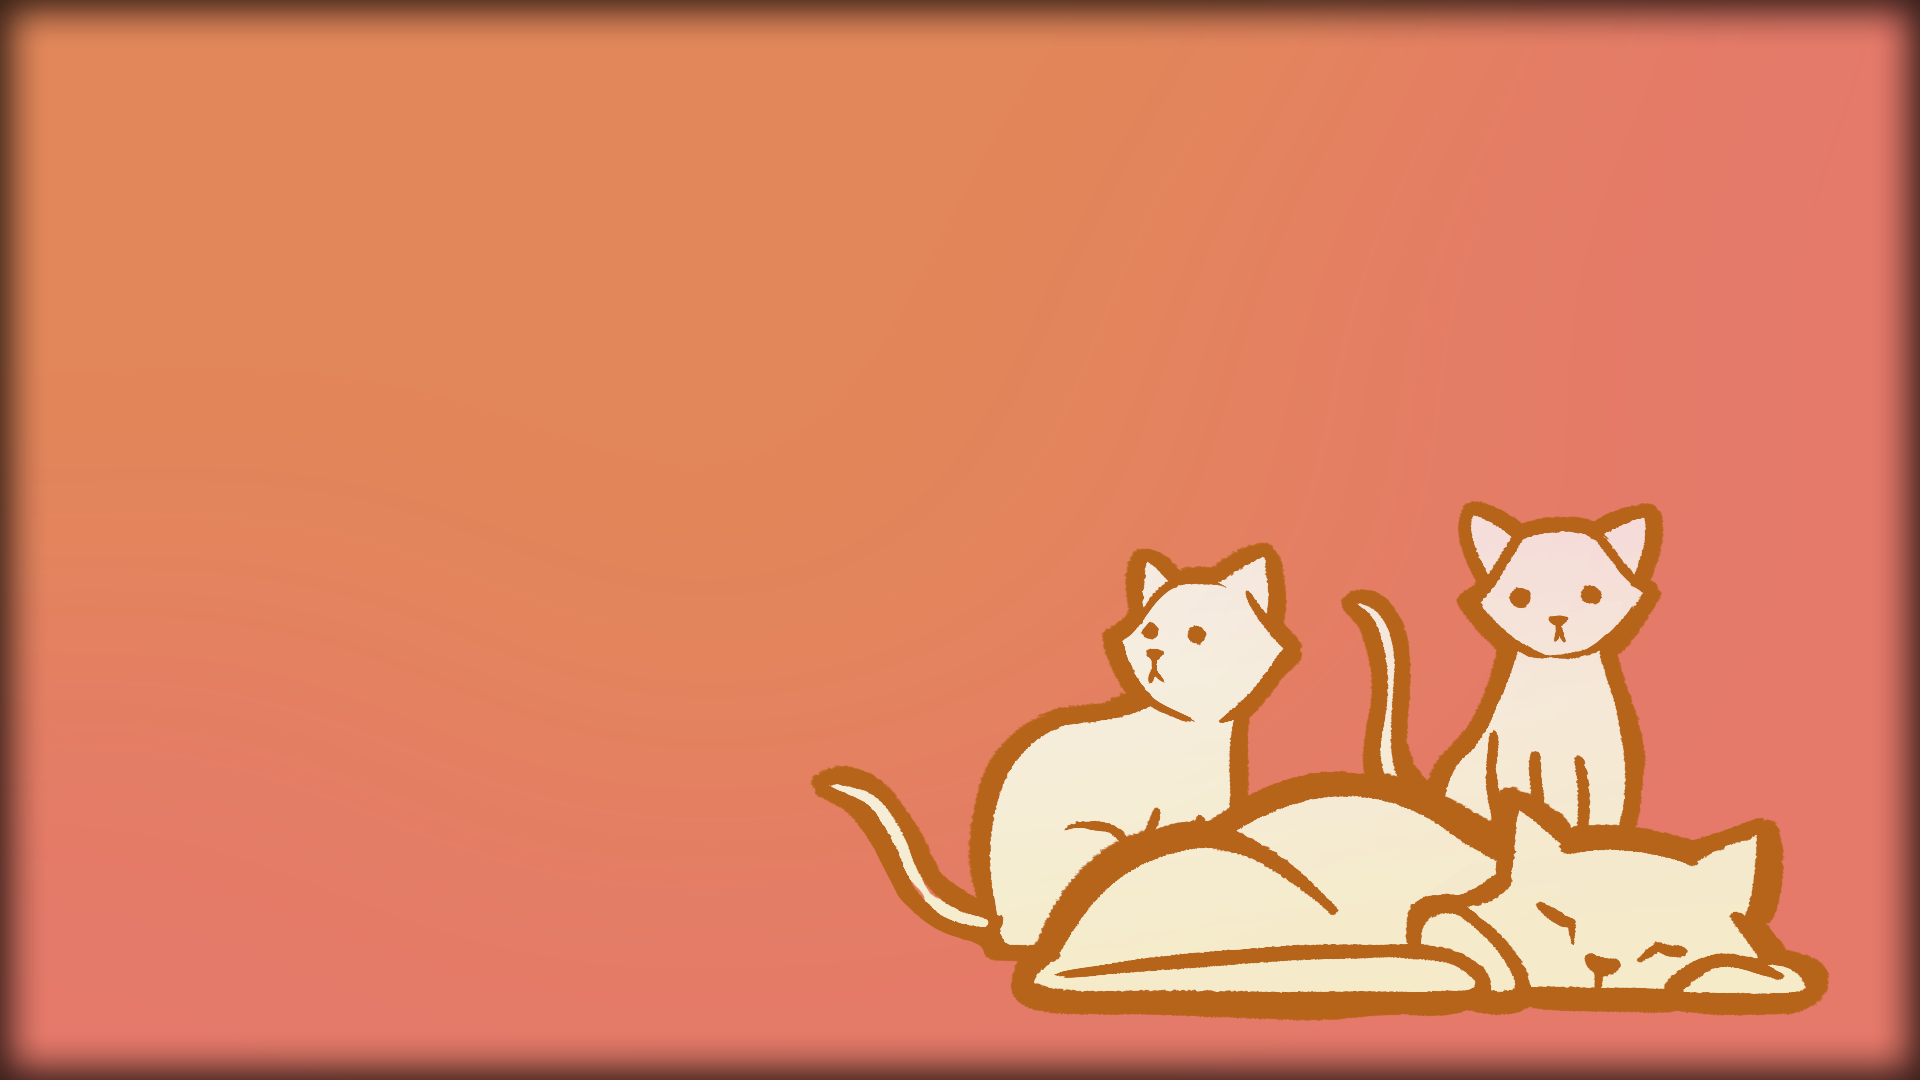 Icon for Found 60 cats